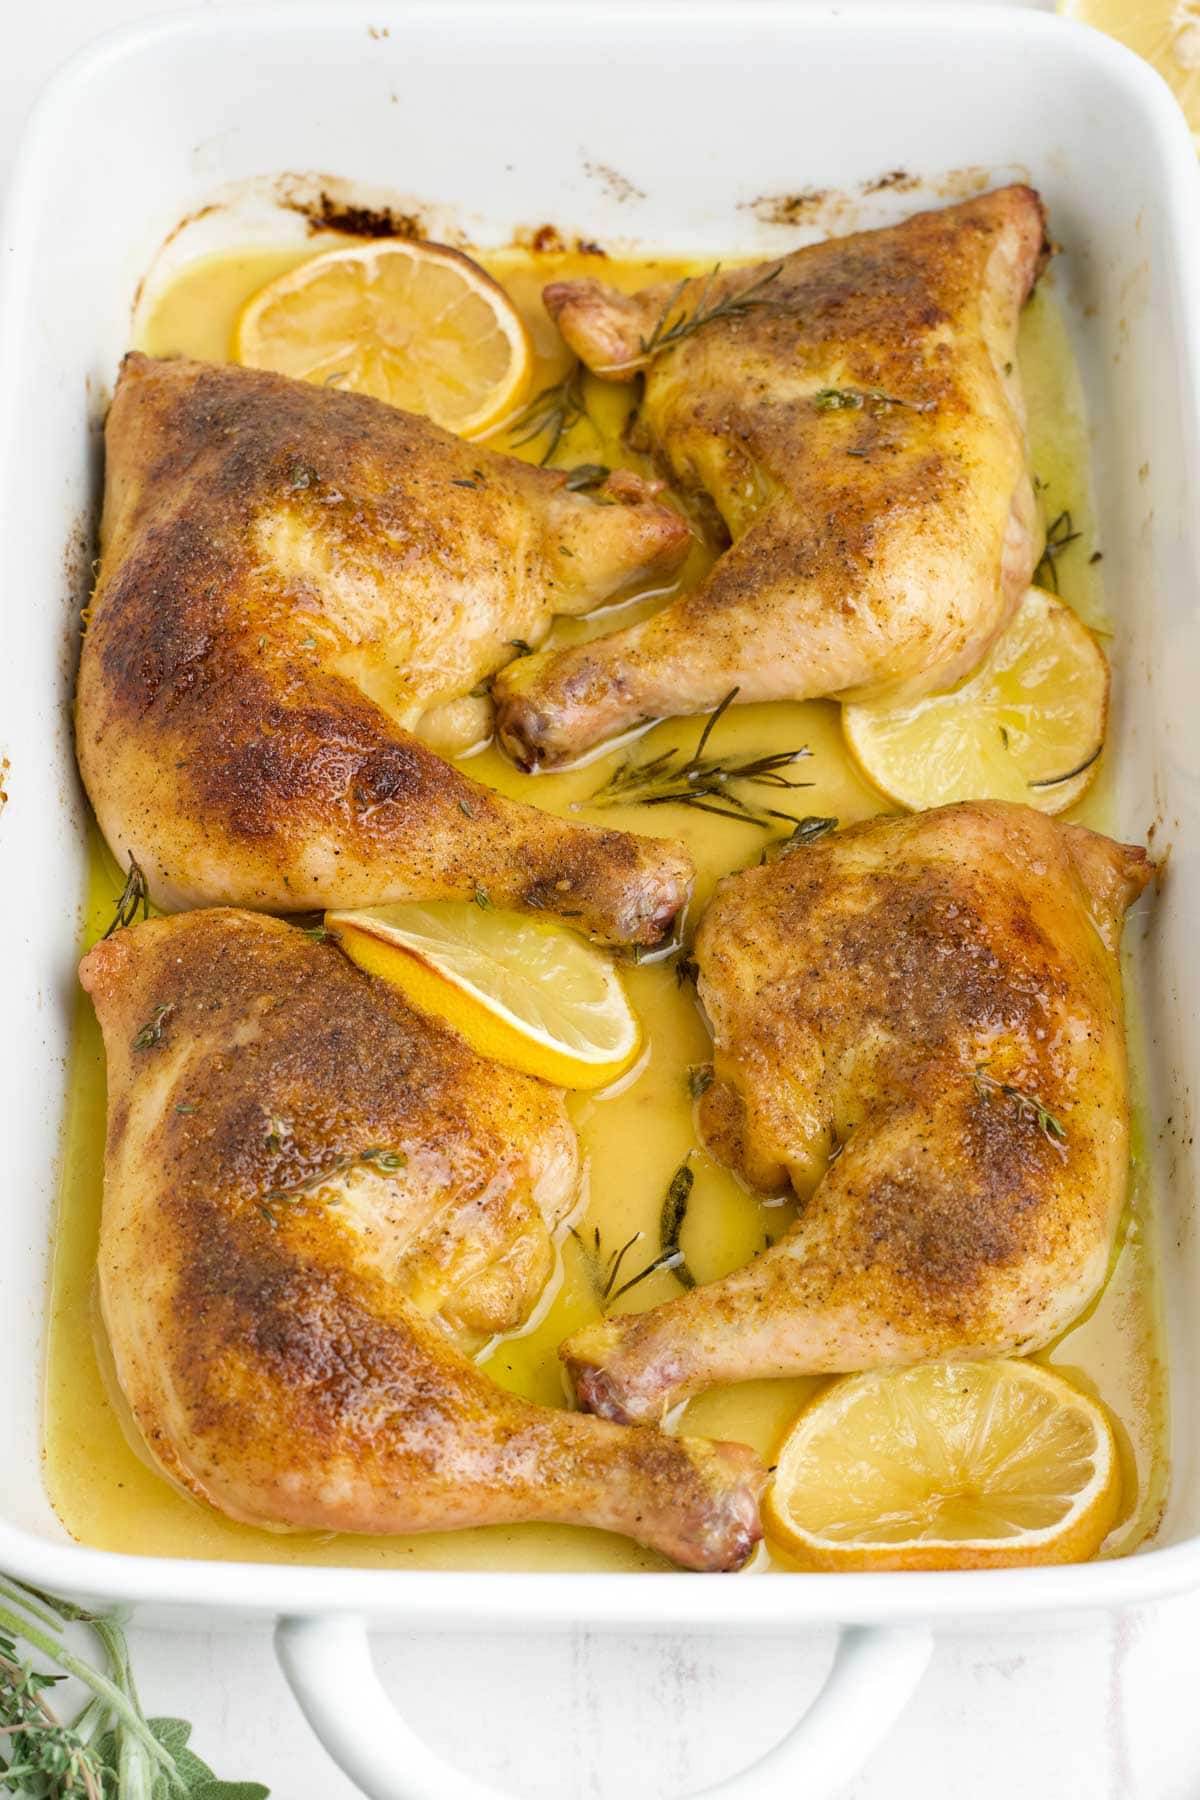 Chicken leg quarters in a white baking dish with lemon slices.